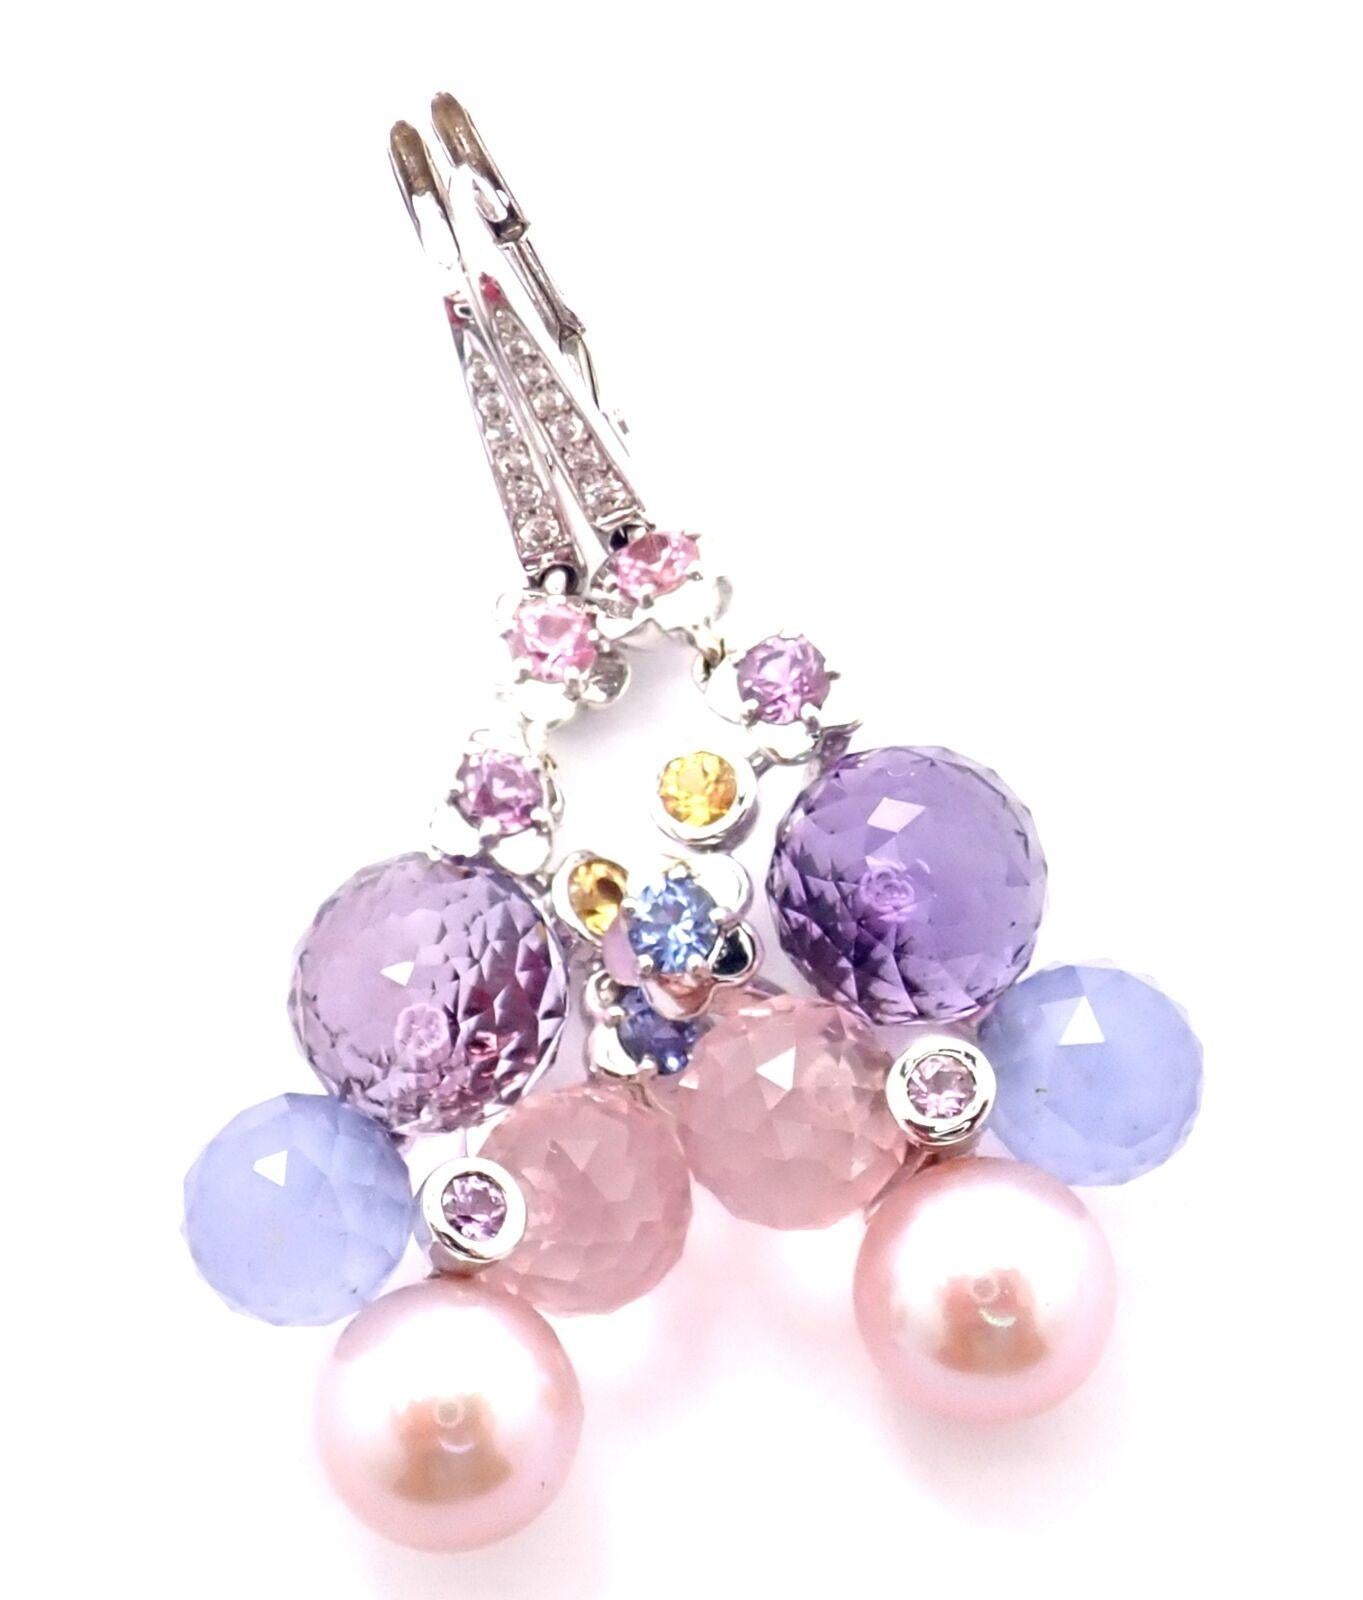 8k White Gold Diamond Amethyst Pearl Sapphire Mademoiselle Earrings by Chanel. 
With 12 Round Brilliant Cut Diamonds VS1 clarity, G color total weight approximately .12ct
Amethysts, Sapphires, Pearls
Details: 
Weight: 14.7 grams
Measurements: 47mm x